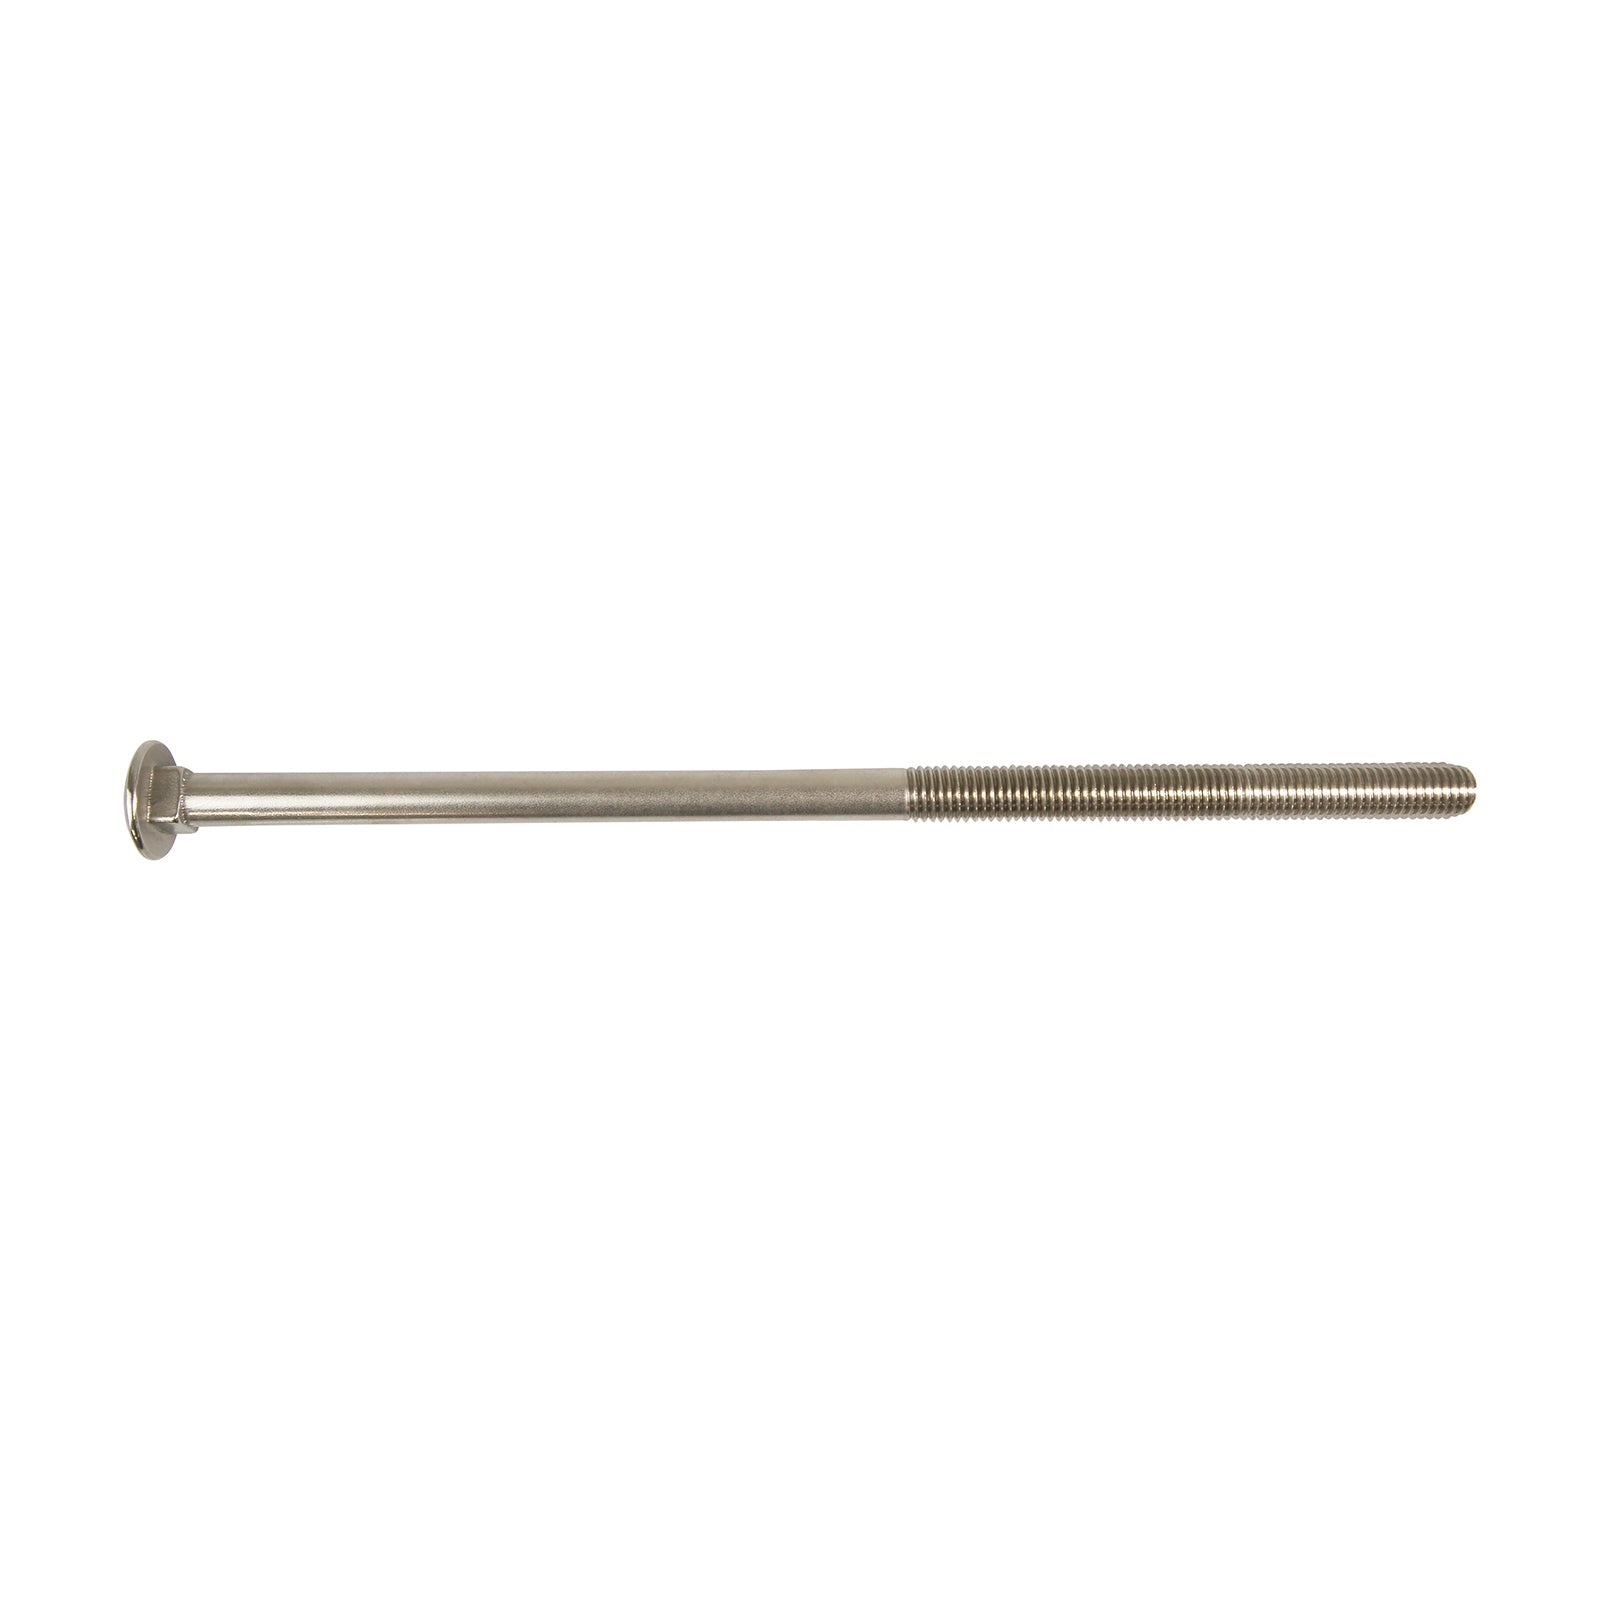 5/8-11 x 14 Conquest Carriage Bolt - 304 Stainless Steel